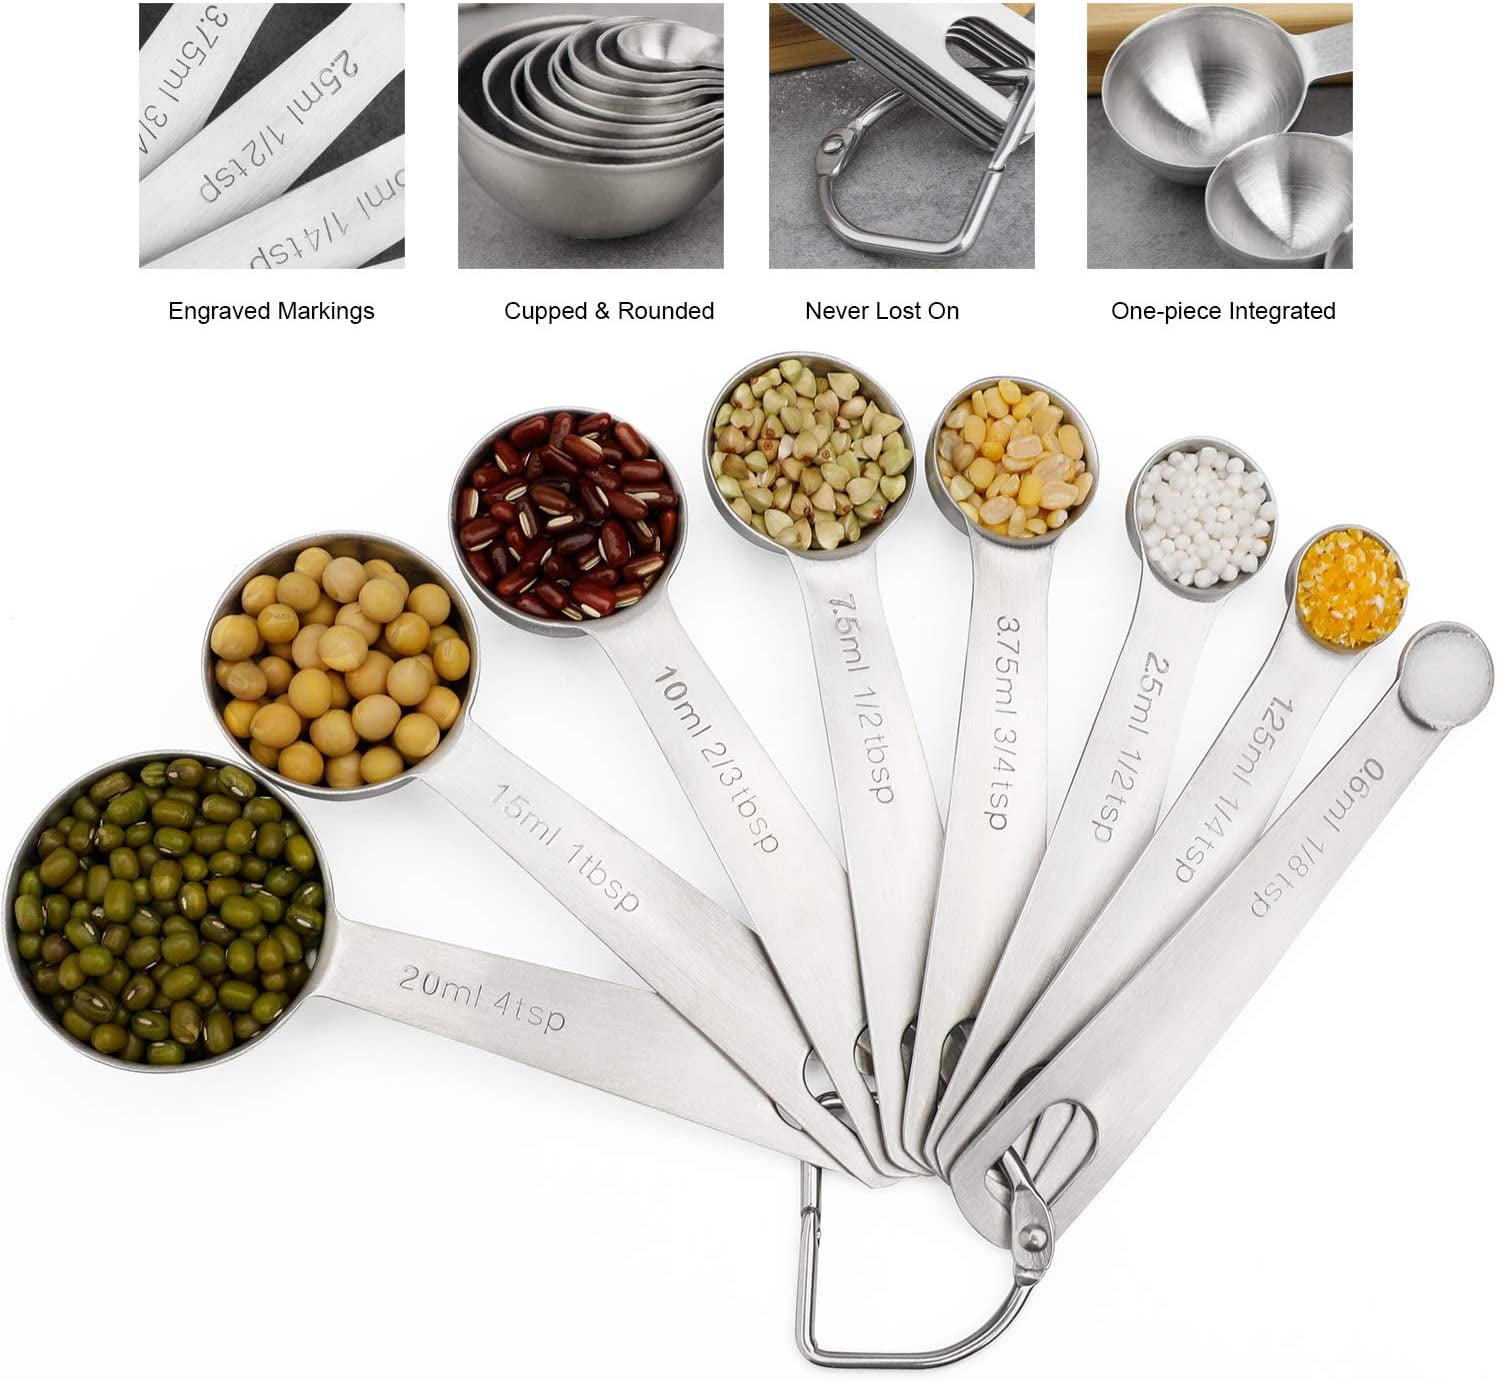 5PCS Small Measuring Spoons Set - Cuttte Stainless Steel Tiny Measuring  Spoons for Cooking Baking, 1/4 tsp, 1/8 tsp, 1/16 tsp, 1/32 tsp, 1/64 tsp,  Teaspoon Mini Measuring Spoons for Powders, Spices